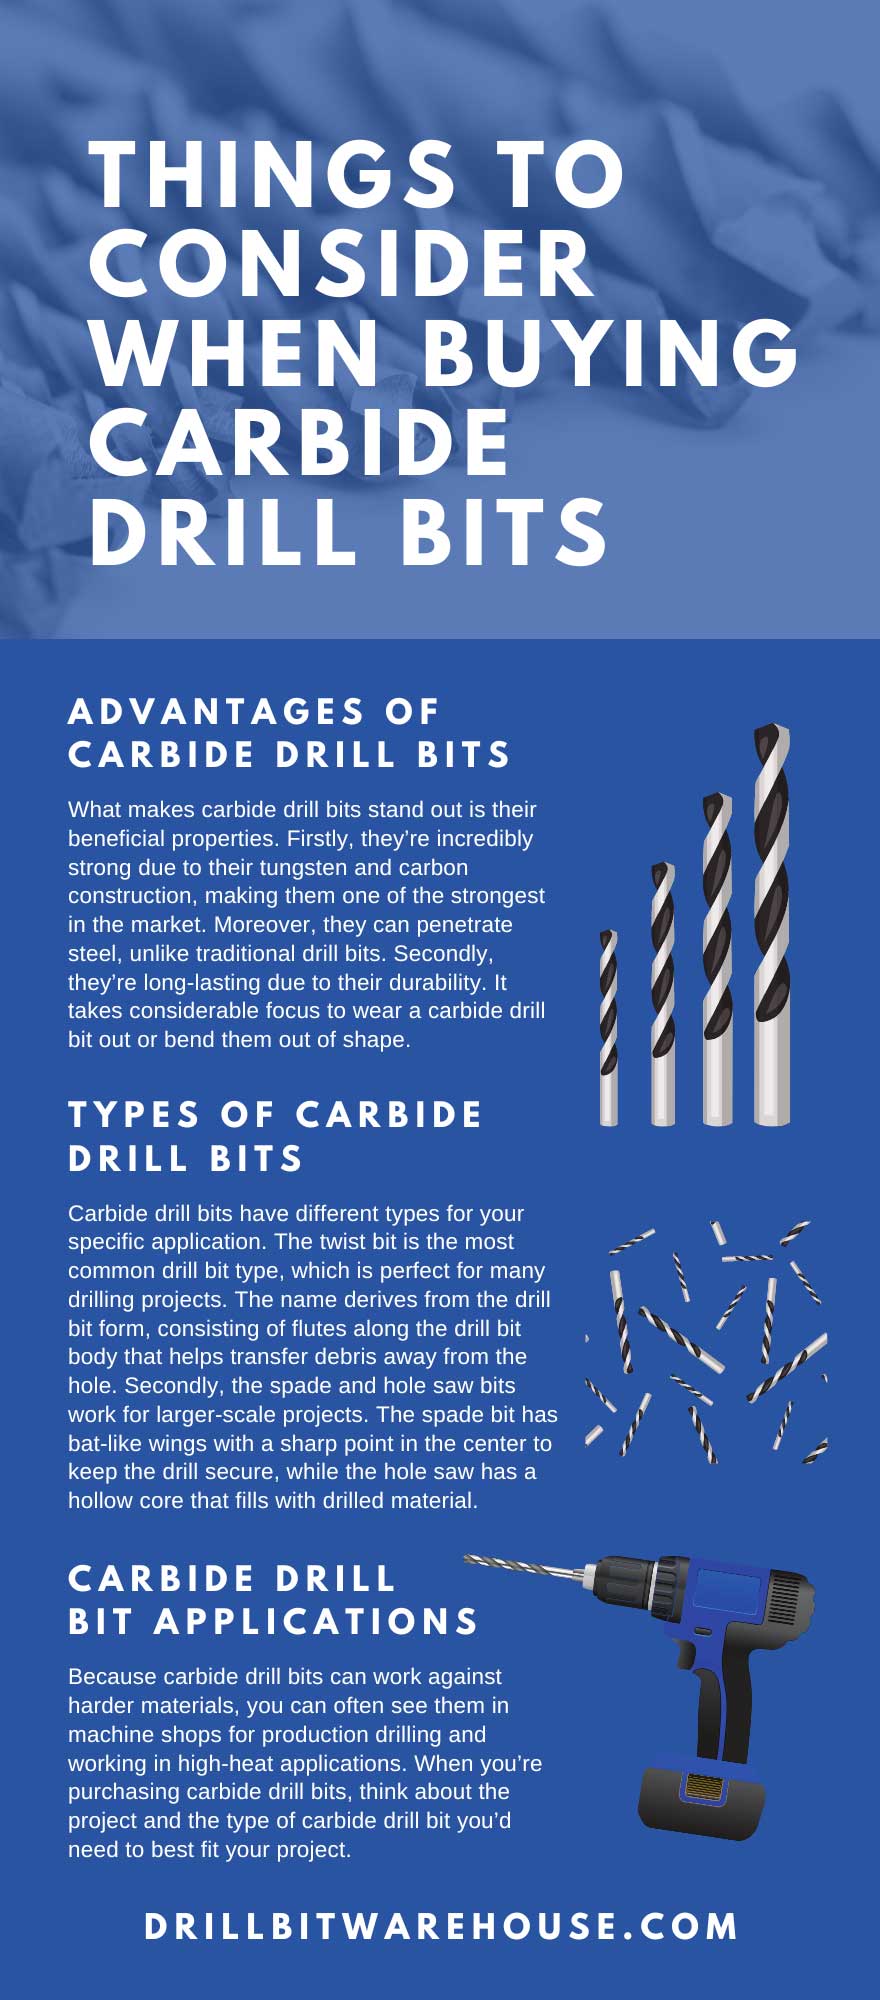 6 Things To Consider When Buying Carbide Drill Bits